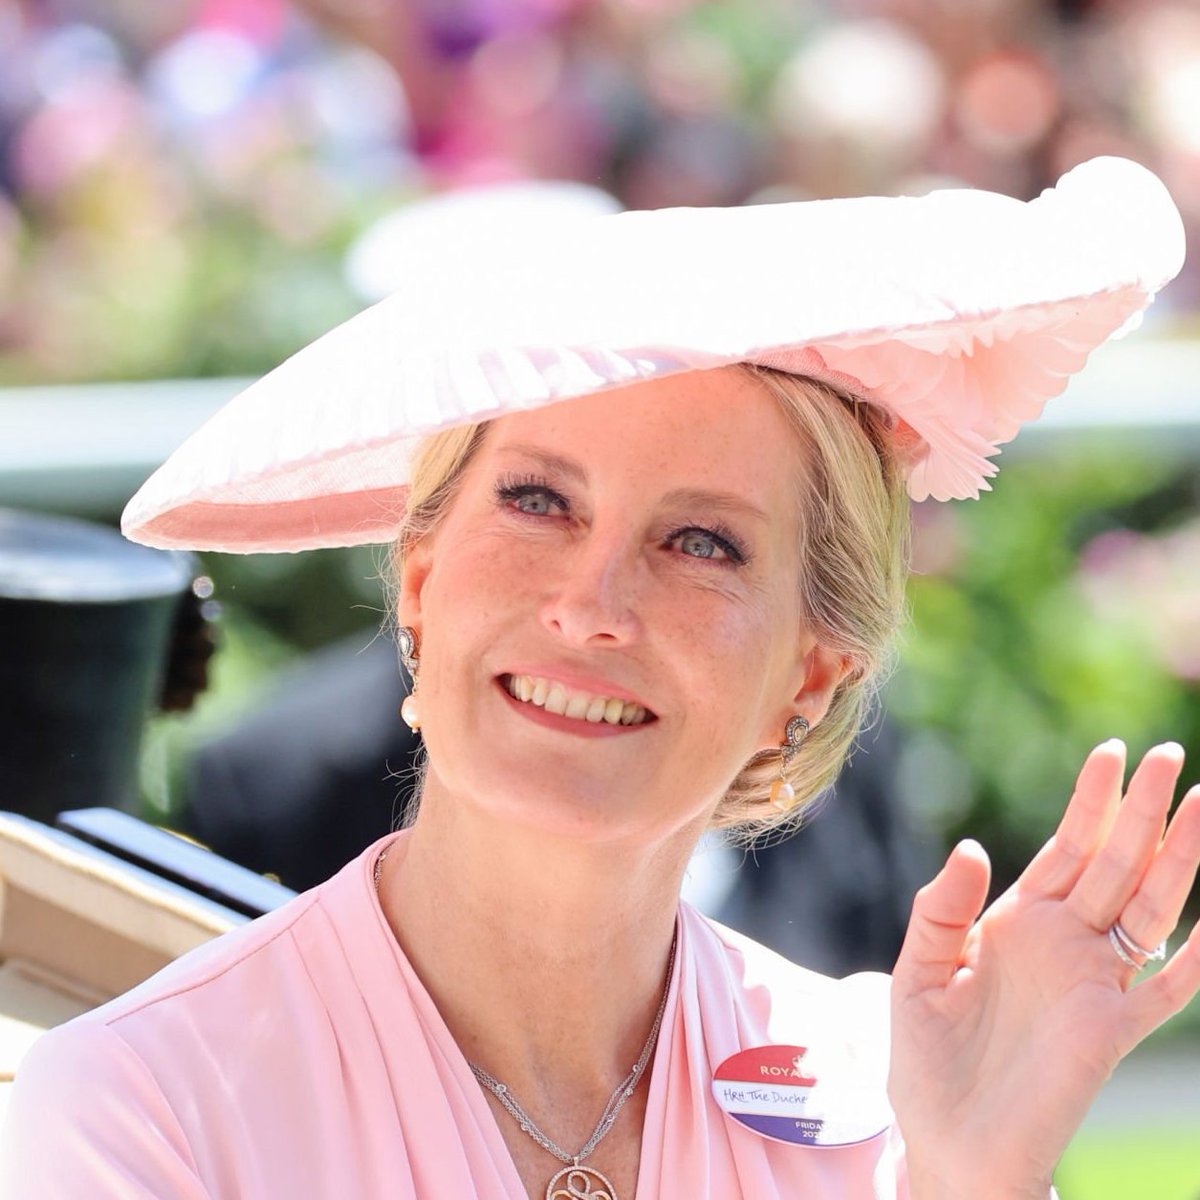 Sophie in pink (Ascot 2023, day 4). Isn't she sweet? 🌸#theduchessofedinburgh #sophieduchessofedinburgh #duchessofedinburghsophie #sophieedinburgh #theedinburghs #sophierhysjones #sophiewessex #royalfamily #britishroyalfamily #royals